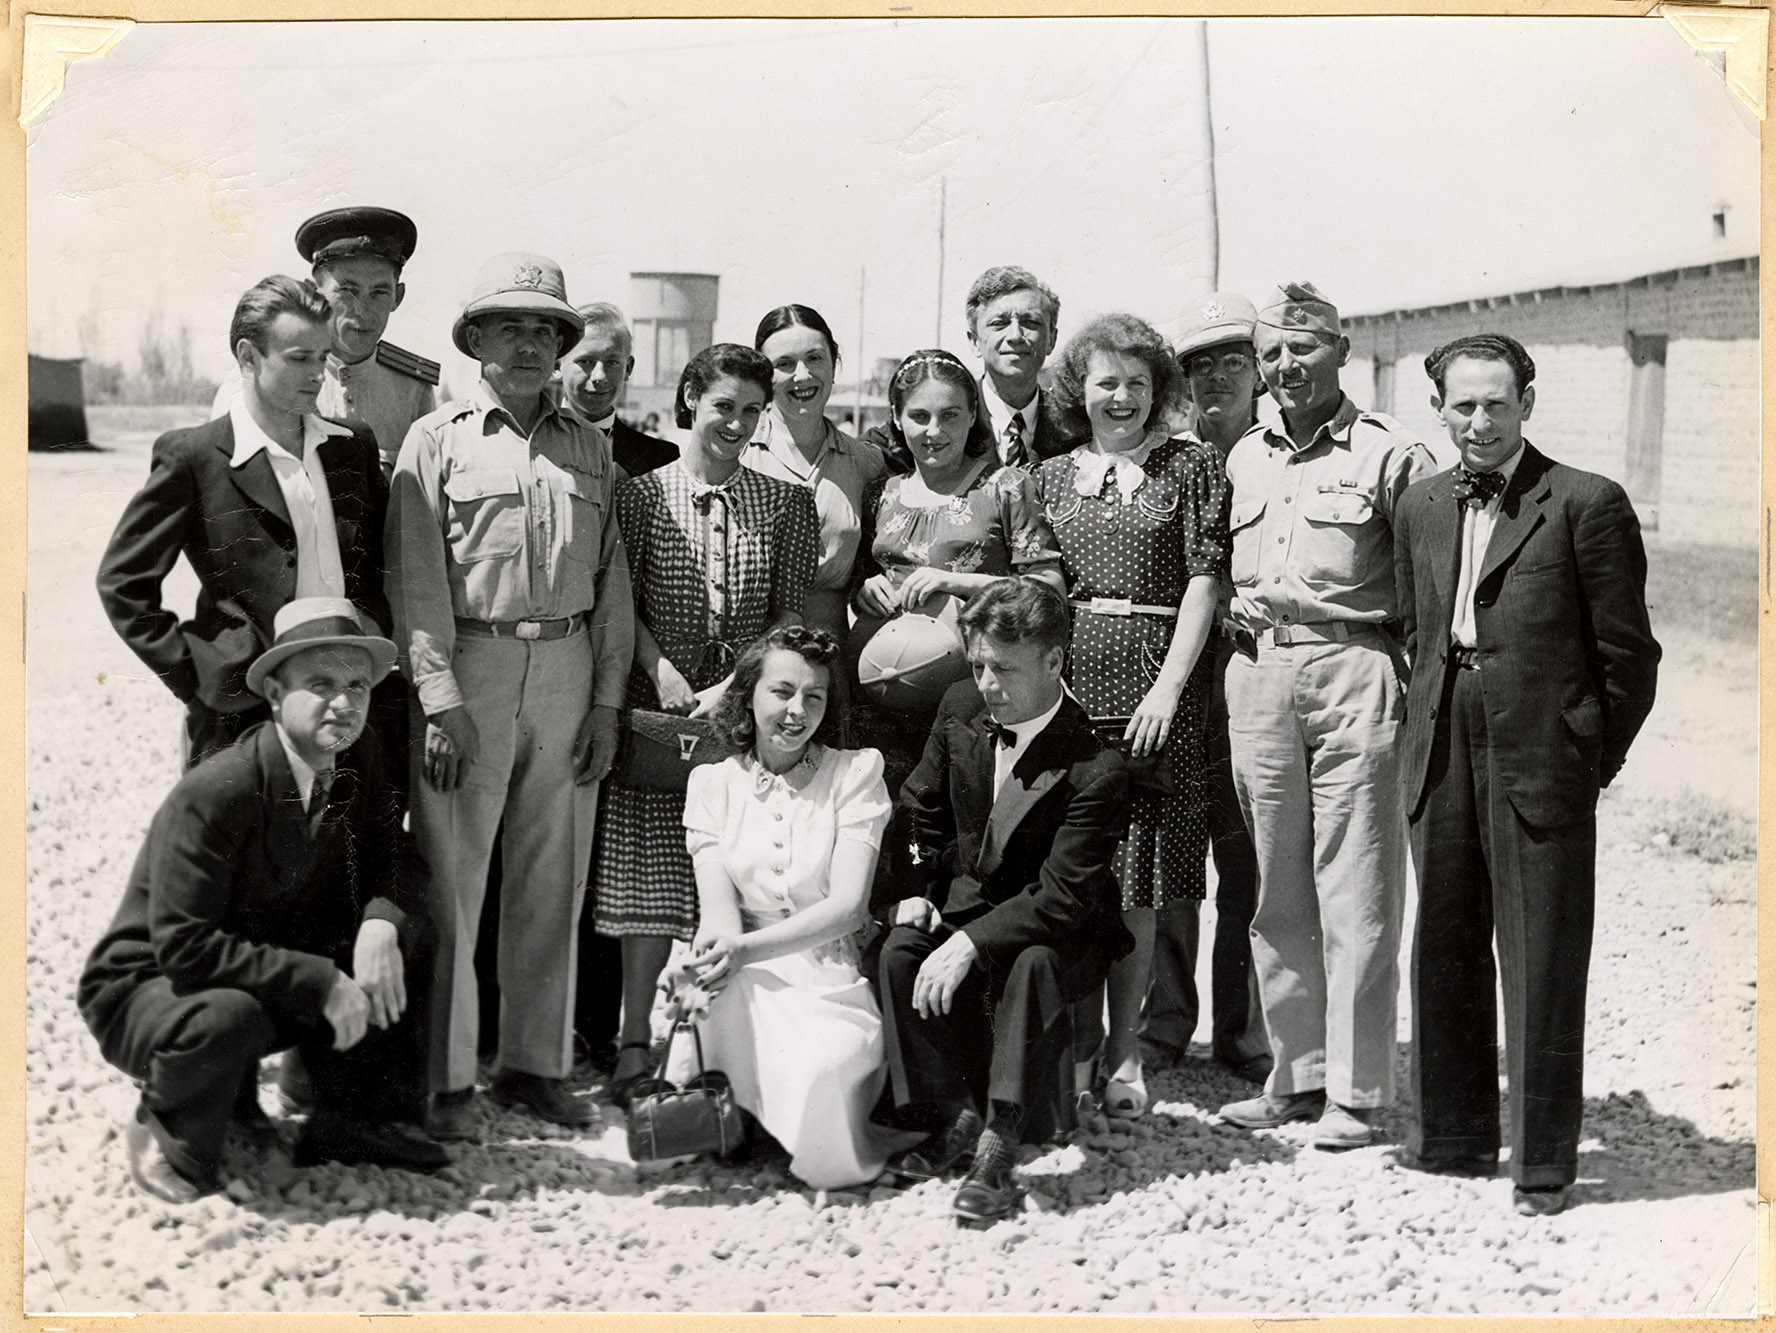 A group of several people pose outside for the camera